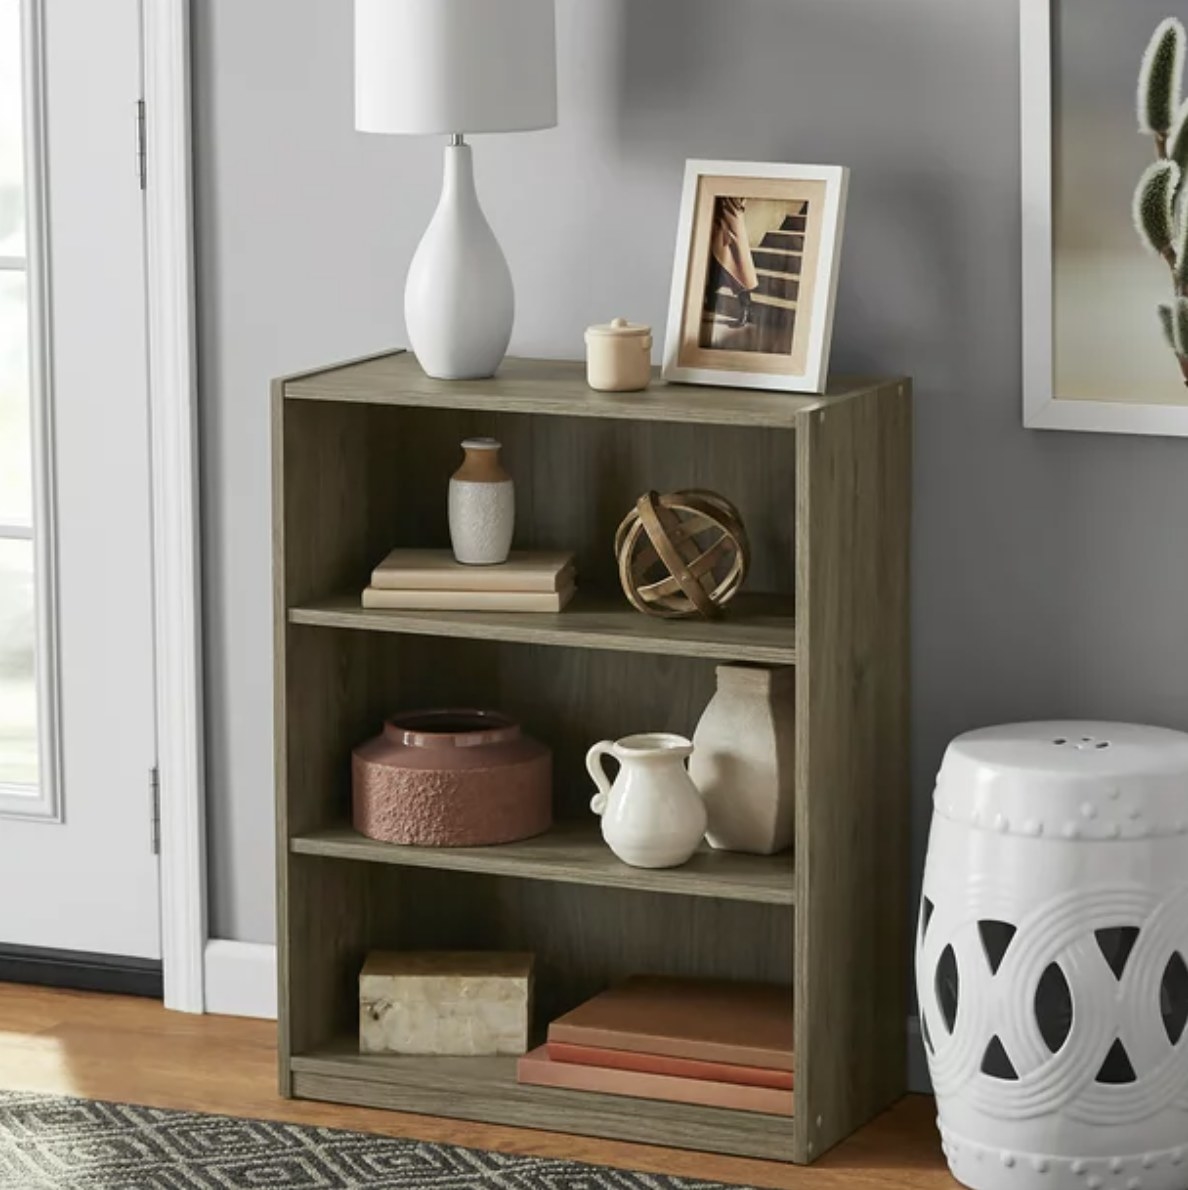 a short wooden shelving unit with decor in a living area